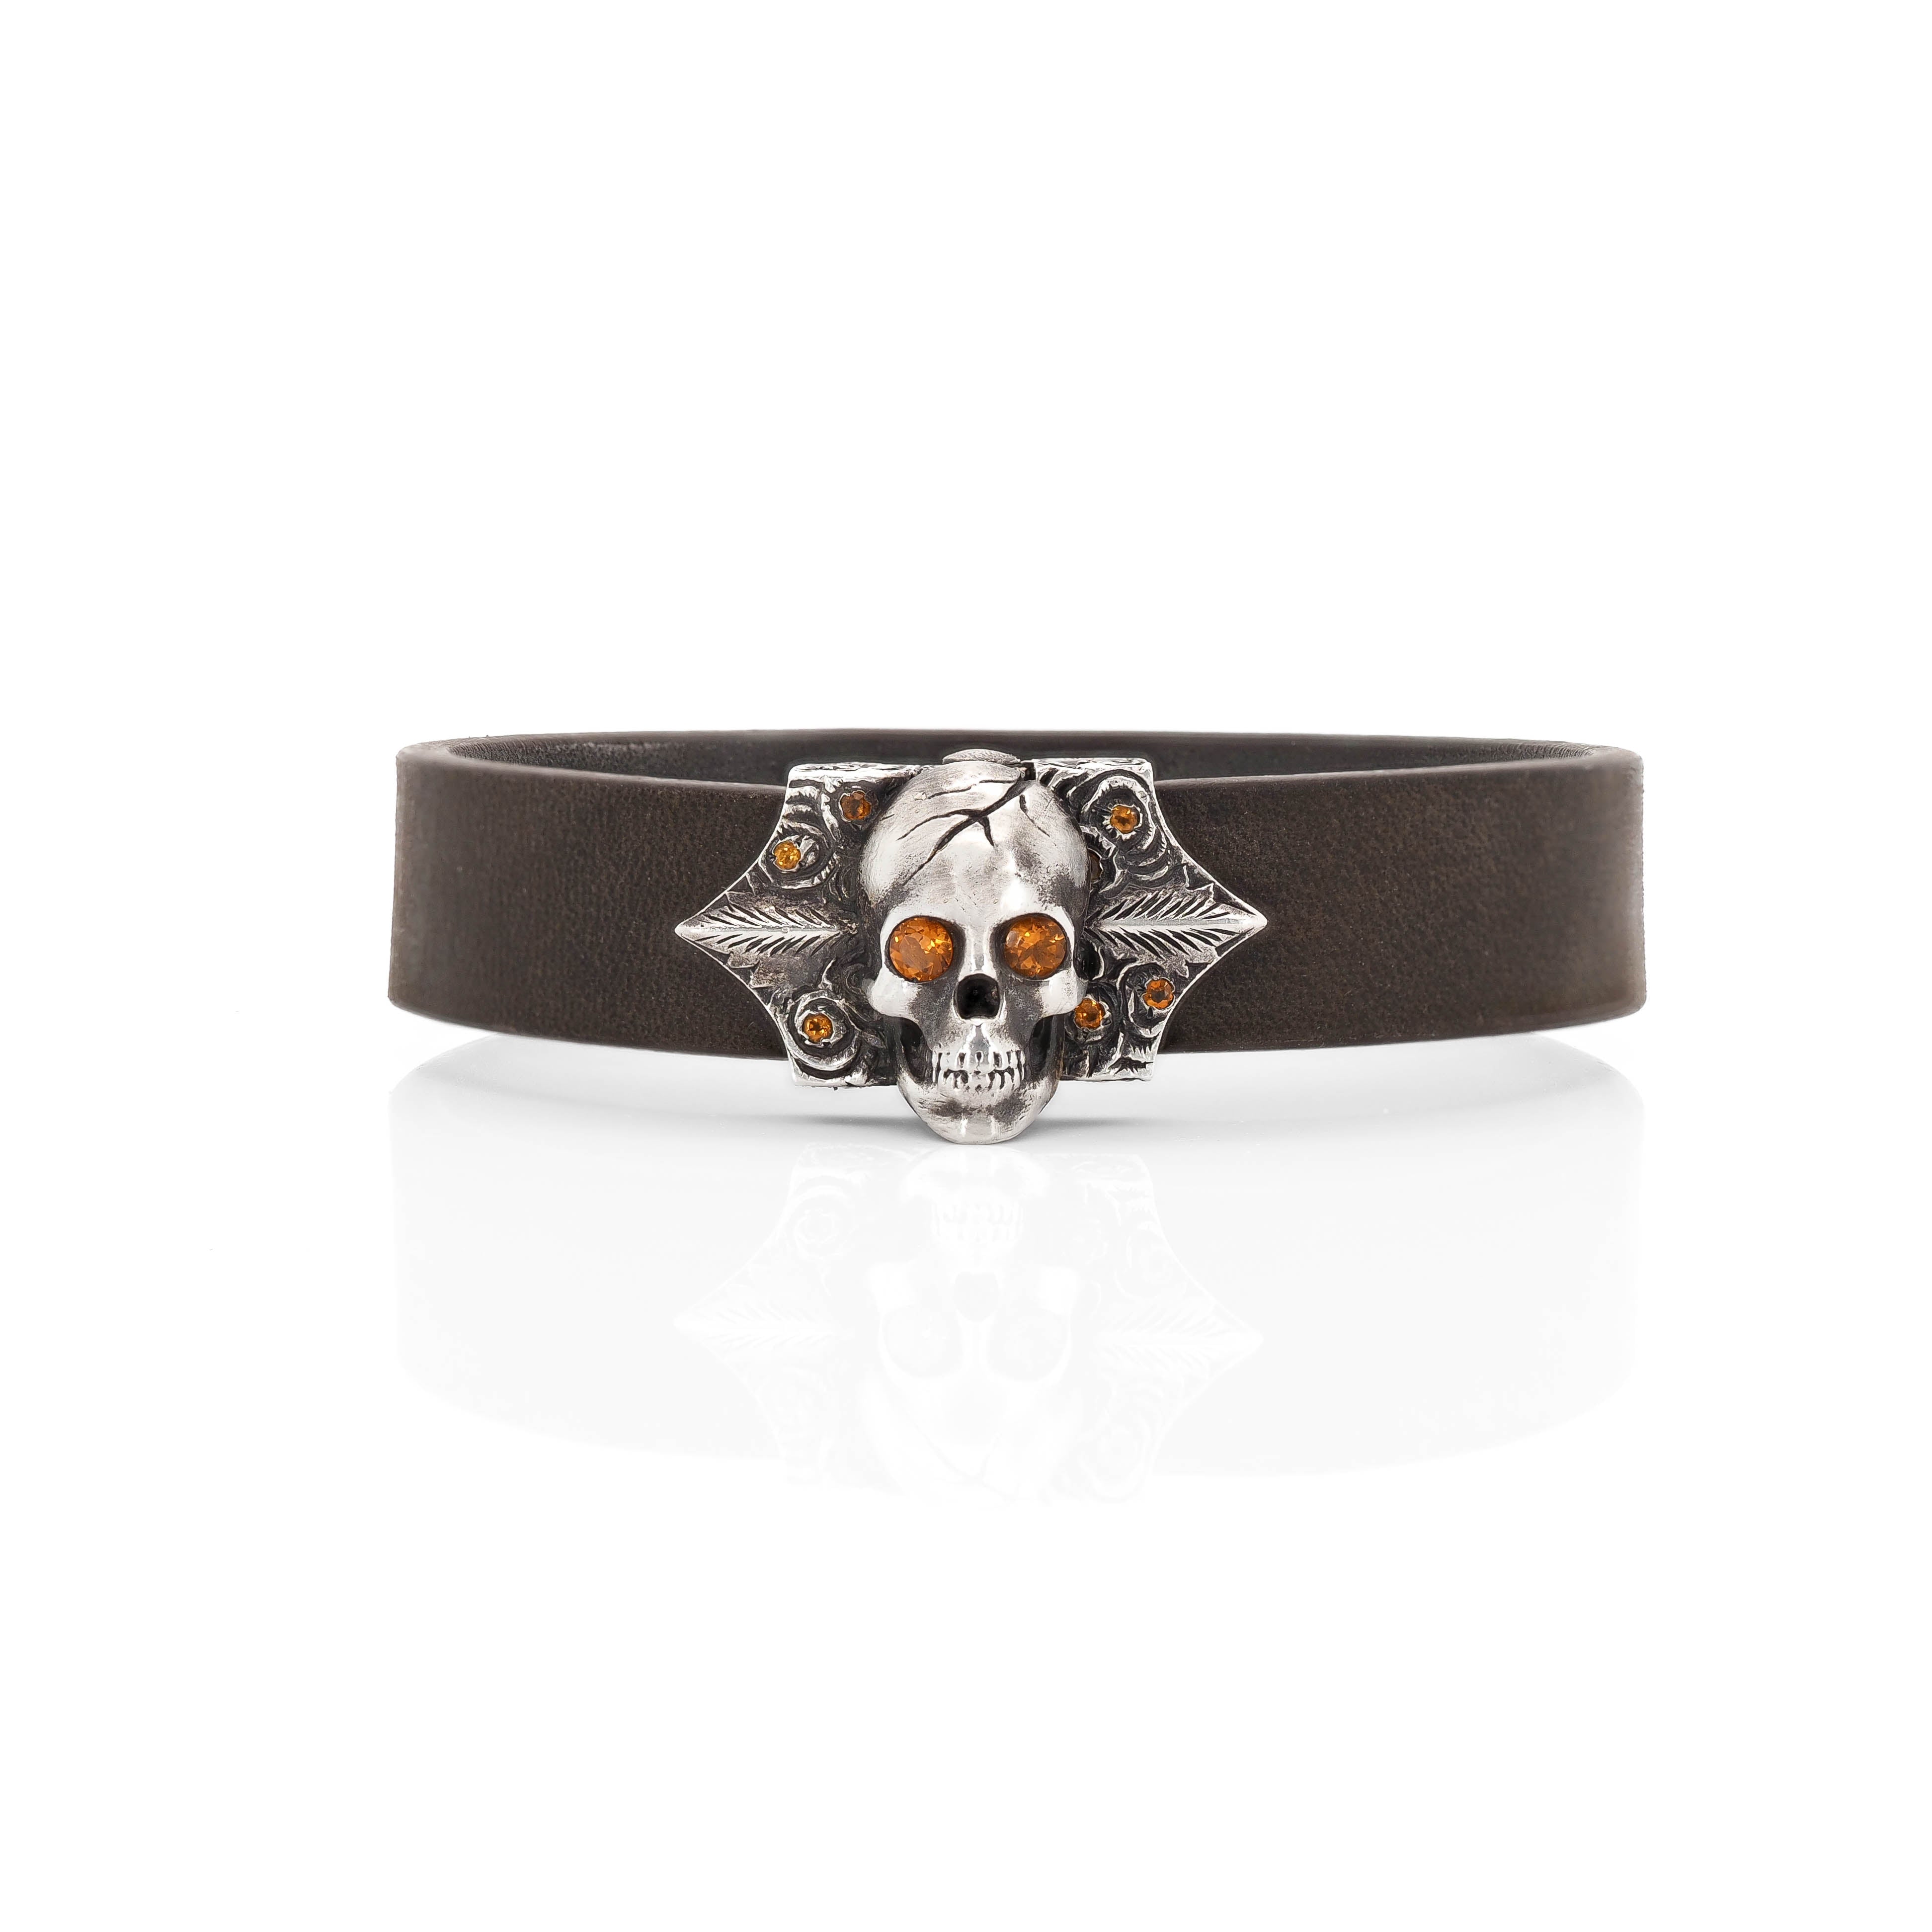 Make a bold fashion statement with Taru Jewelry Skull and Roses bracelet. Decorated with delicate rose engravings, it features glittering citrine roses and shining eyes on the skull design, making it a truly unique piece. The bracelet is strapped by a dark brown leather strap, making it both stylish and comfortable to wear.